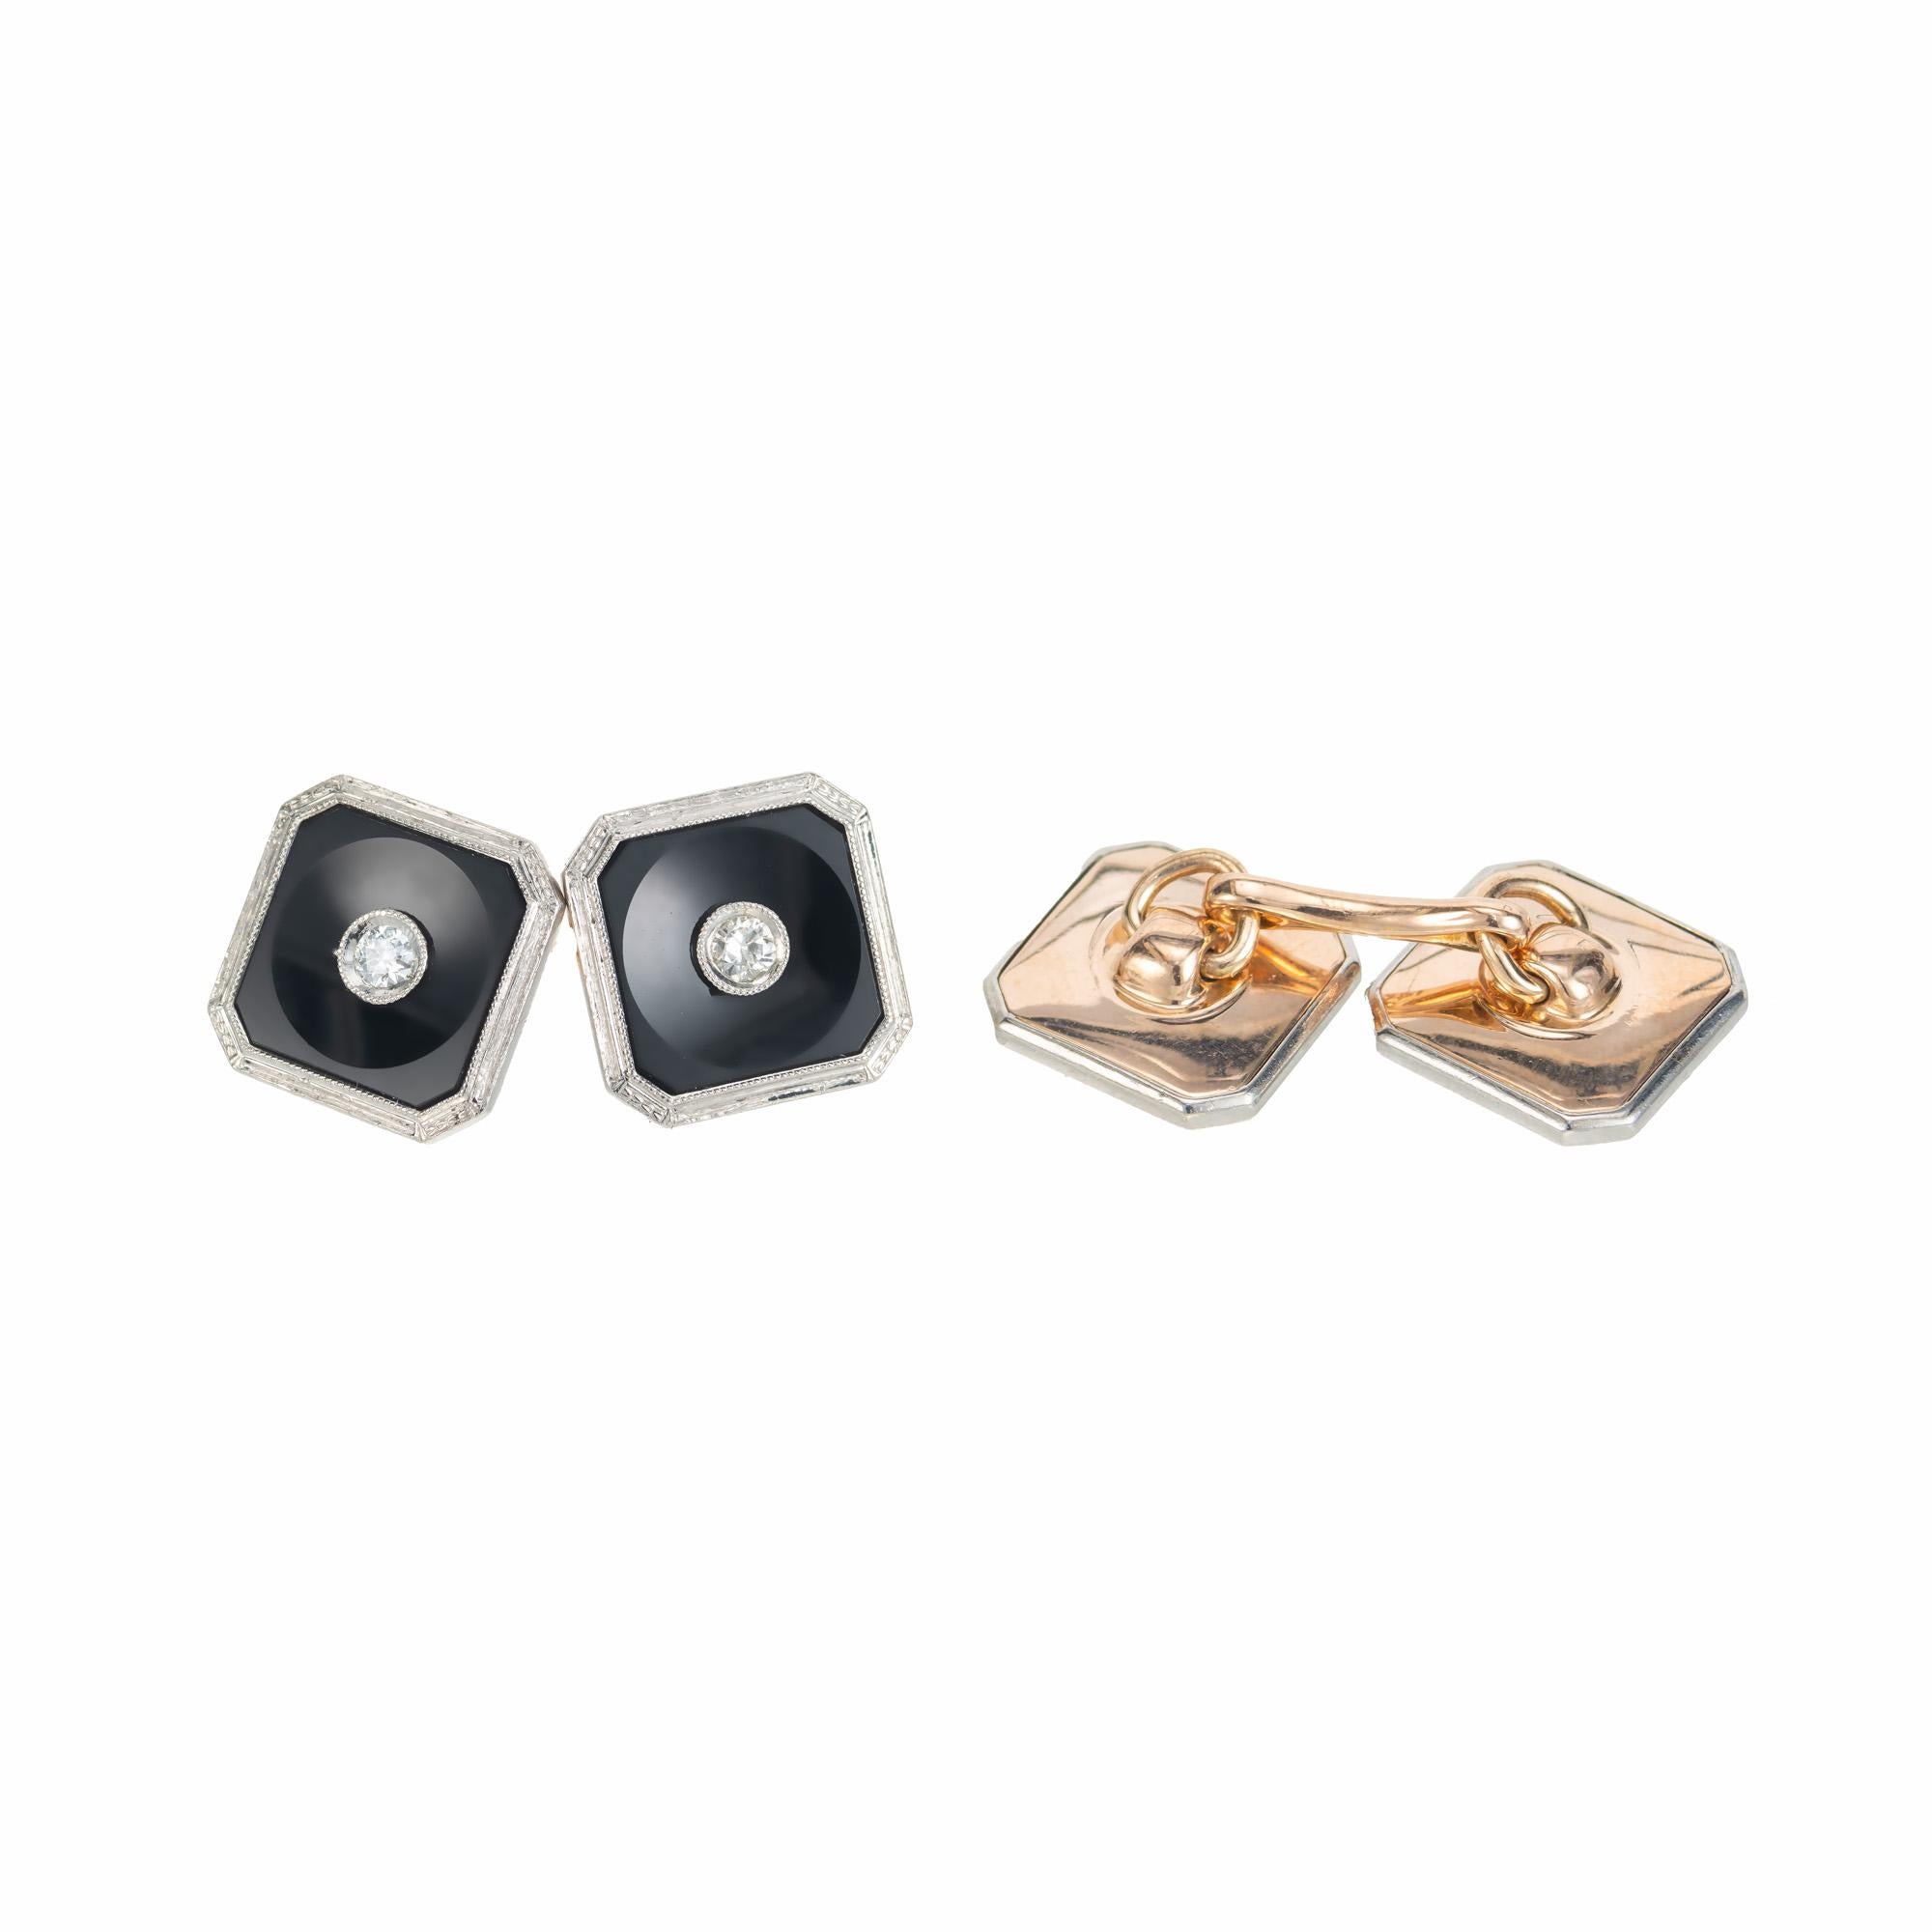 Early 1920's Krementz of New Jersey 14k onyx and diamond dress set in 14k gold with a platinum top. See the details listed below. 

2 double sided cufflinks:
2 full cut diamonds, H VS approx. .15cts
carved black onyx
4 Studs:
4 diamonds, H VS